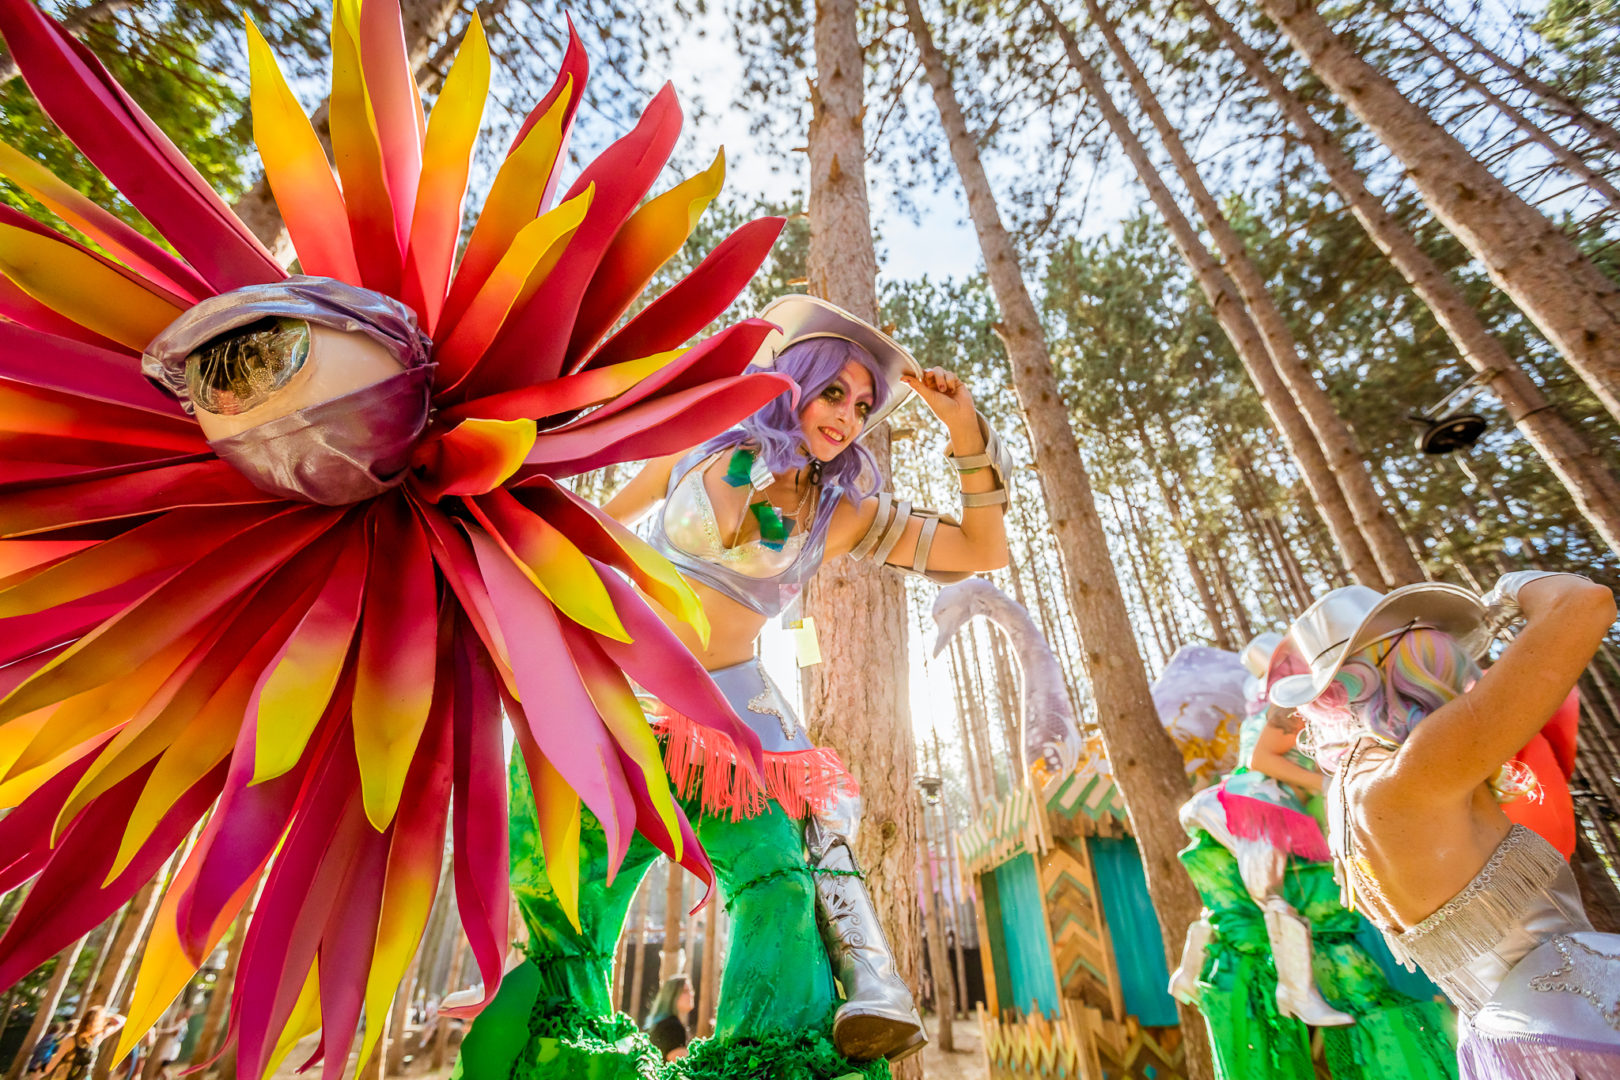 electric forest festival, one of the best camping festivals in the world